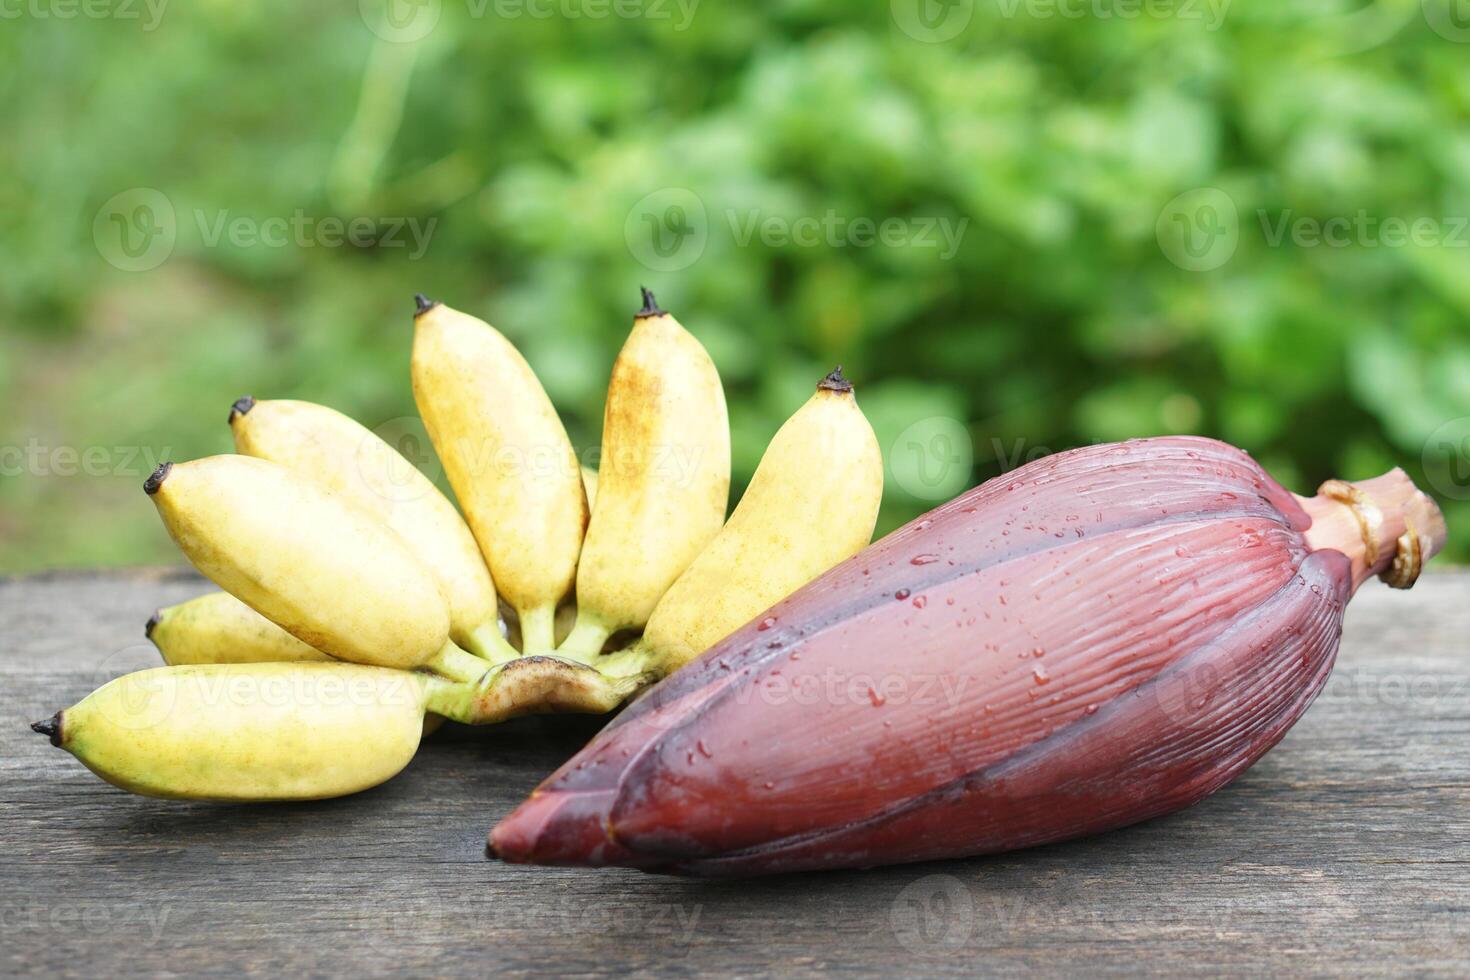 Yellow banana fruits and edible banana flower. Concept, Agriculture crop from garden. Food ingredient can be cooked in variety delicious menu, has medicinal properties Good for health. photo